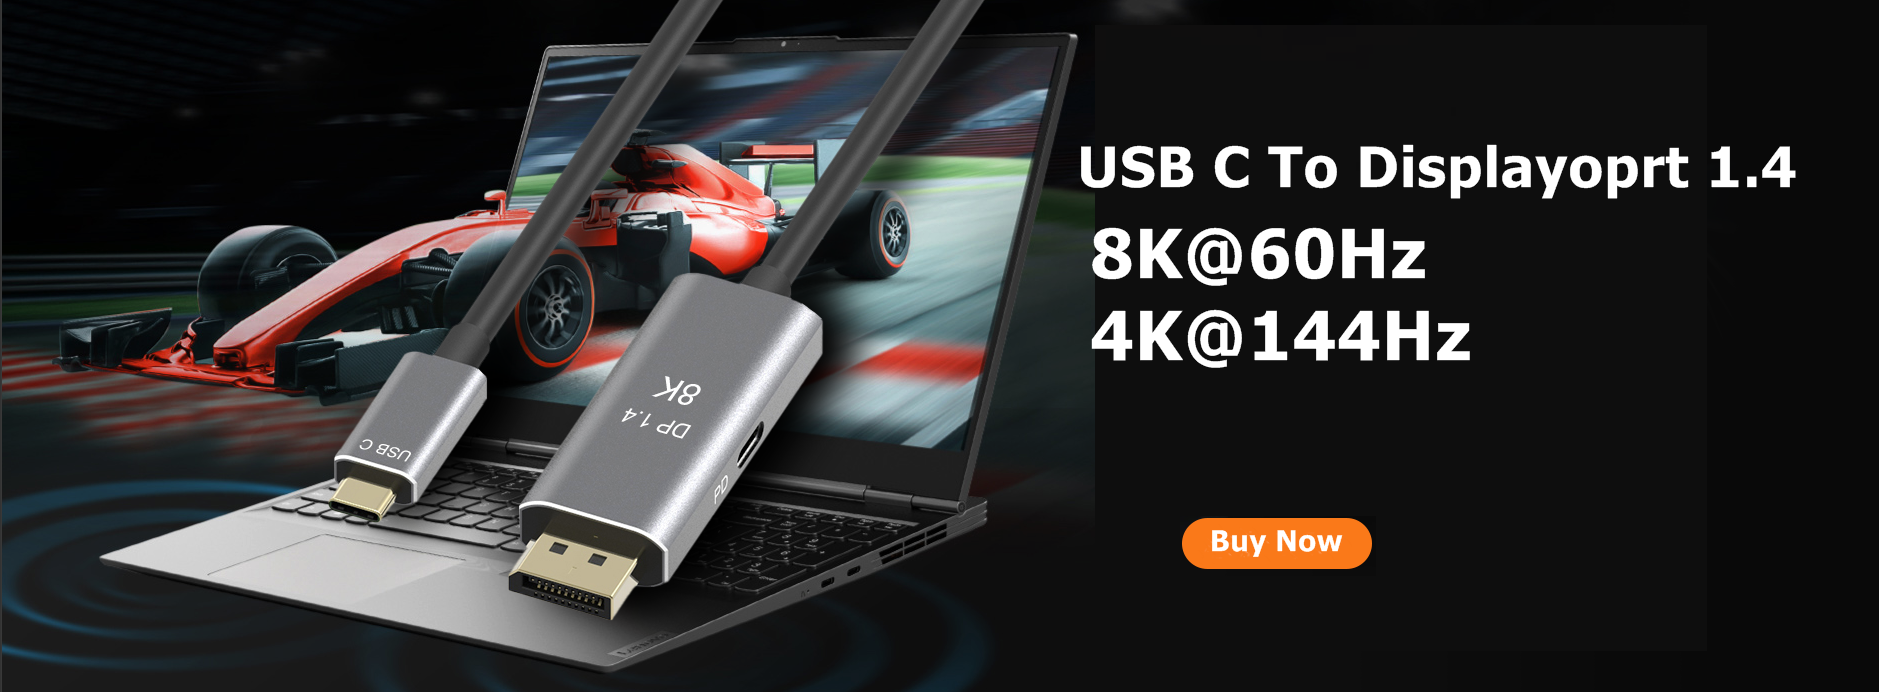 CableDeconn DisplayPort 1.4 8K KVM Switch DP 2 PC 1 DP Monitor 2In 1Out  8K@60Hz 4K@144Hz with 3X USB2.0 Port 2 PC Sharing one Keyboard Mouse  T0206-Diplayport Adapter-CableDeconn